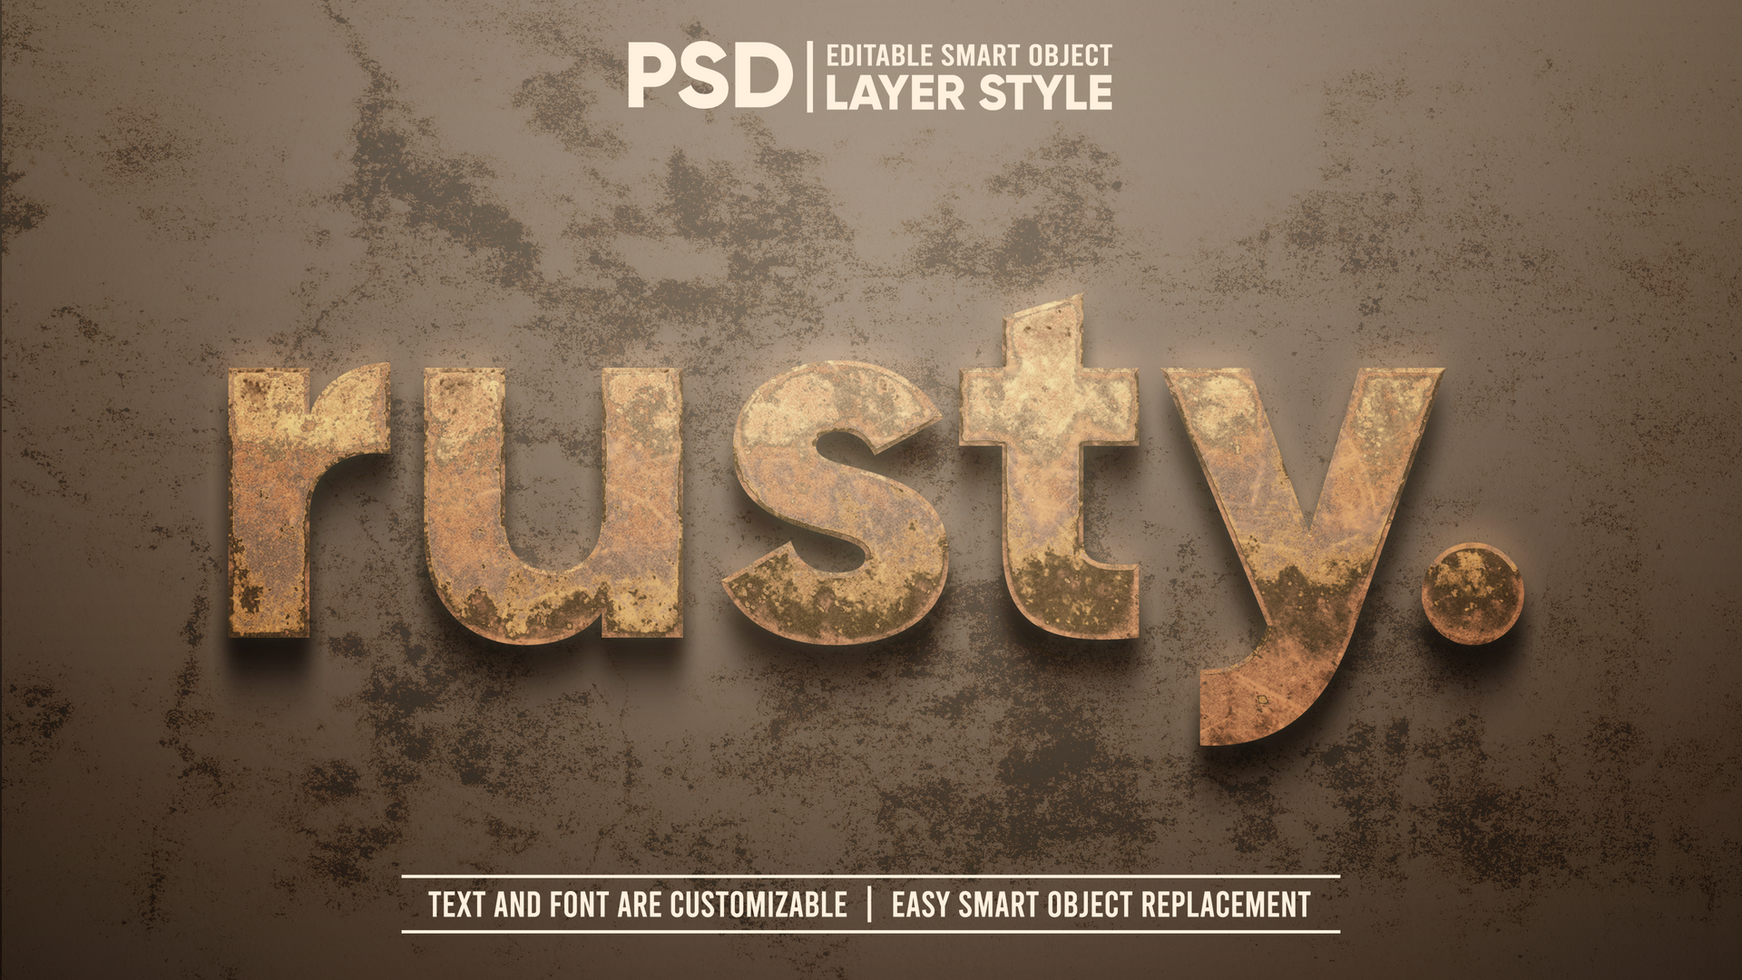 Rusty Dirty Iron Metal 3D Movie Title and Poster Editable Smart Object Layer Style Text Effect psd